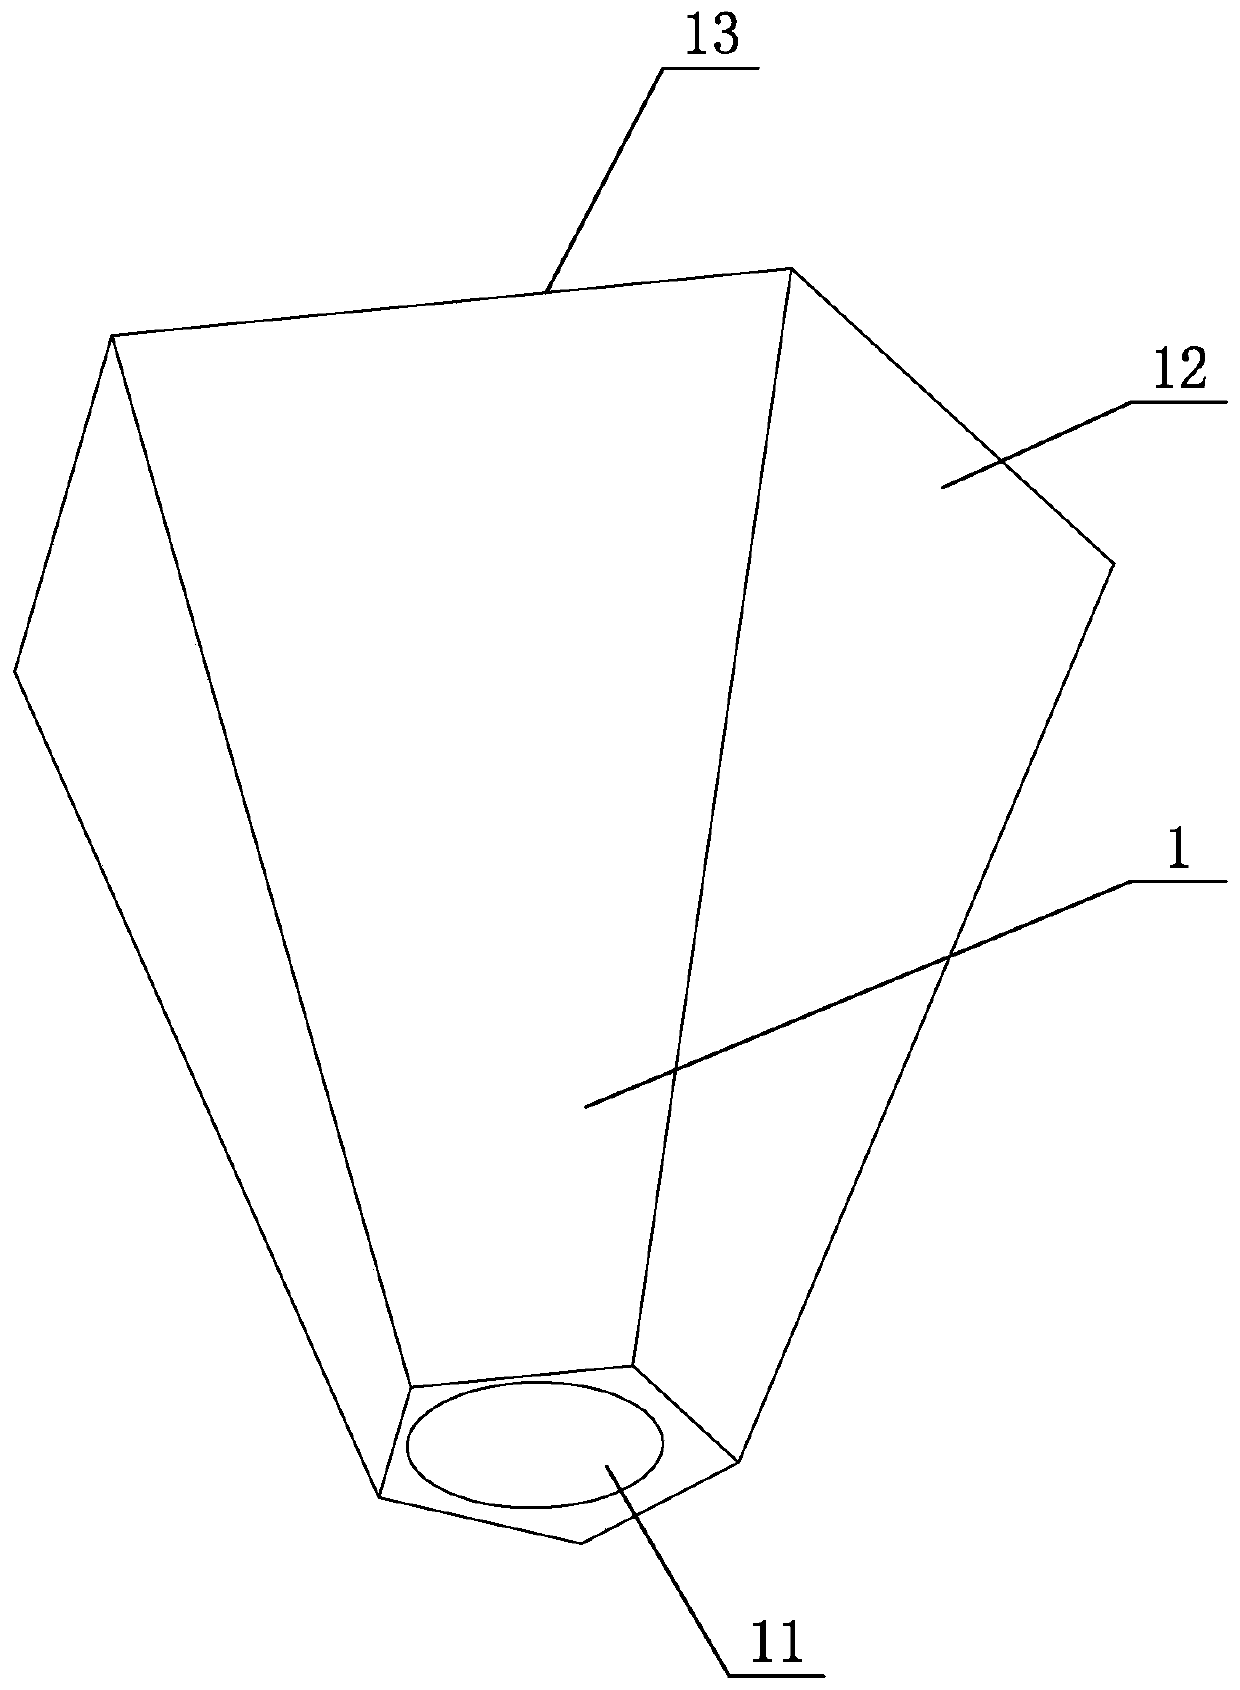 Light guide and condensation structure for surface-mounted LED